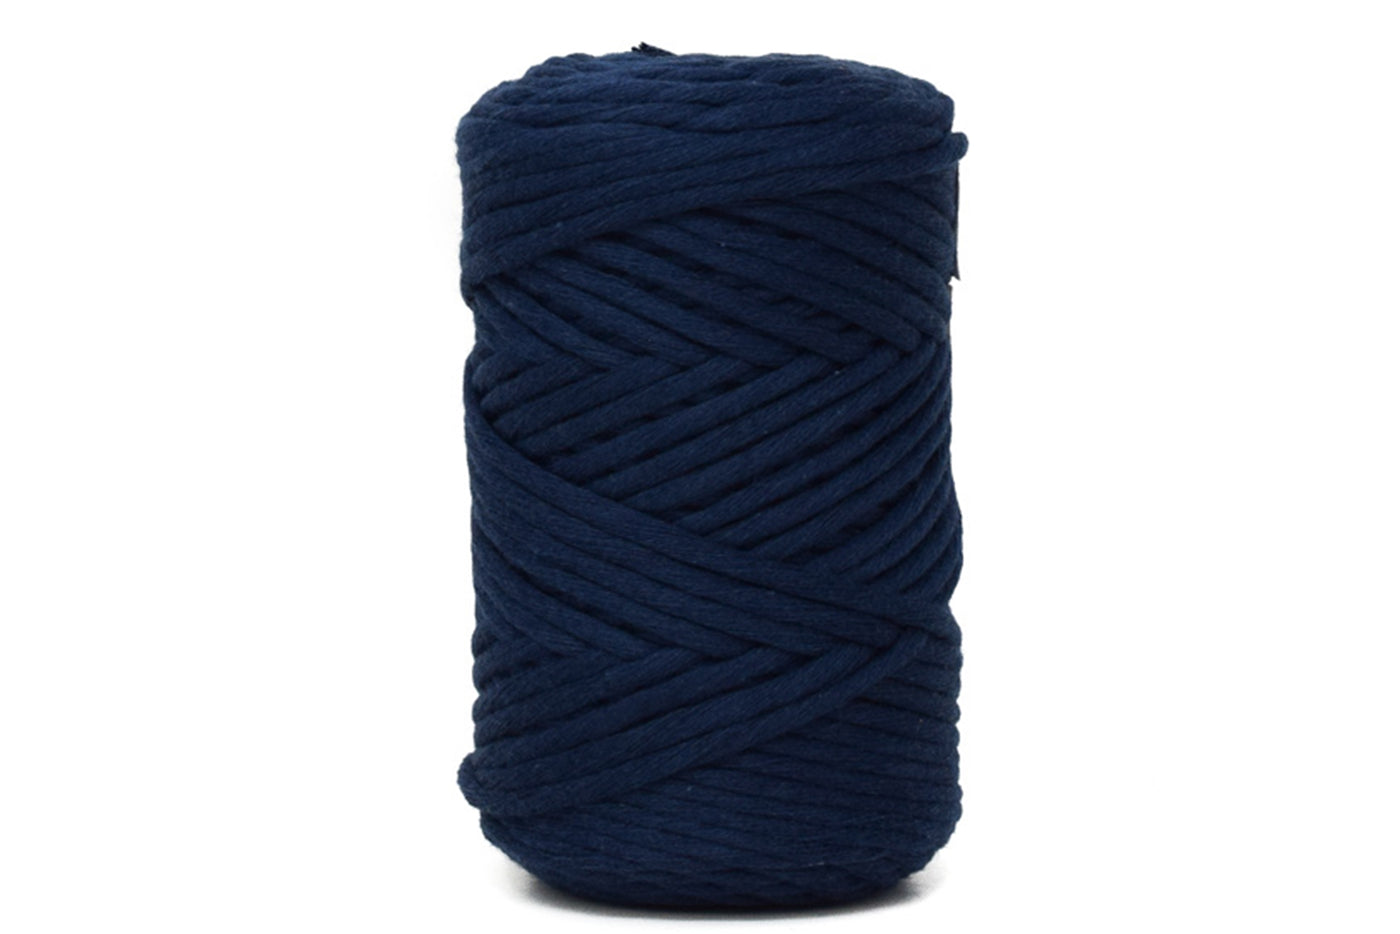 COTTON - VISCOSE ROLL 4 MM - NAVY BLUE COLOR | LIMITED EDITION